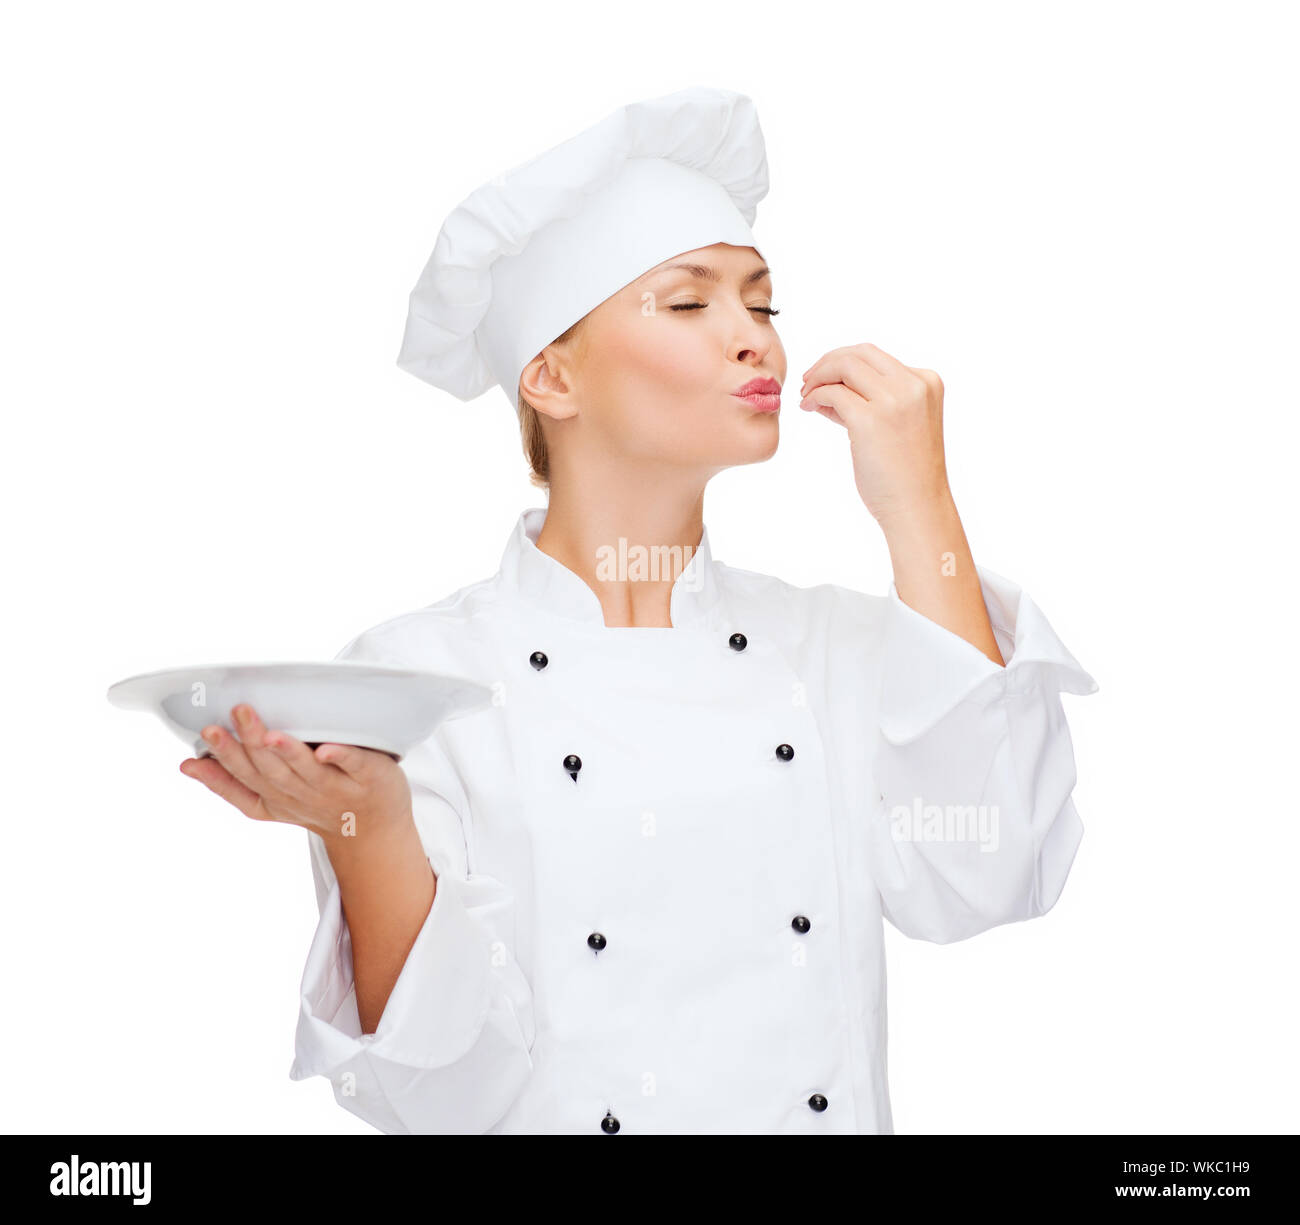 https://c8.alamy.com/comp/WKC1H9/female-chef-with-plate-showing-delicious-sign-WKC1H9.jpg